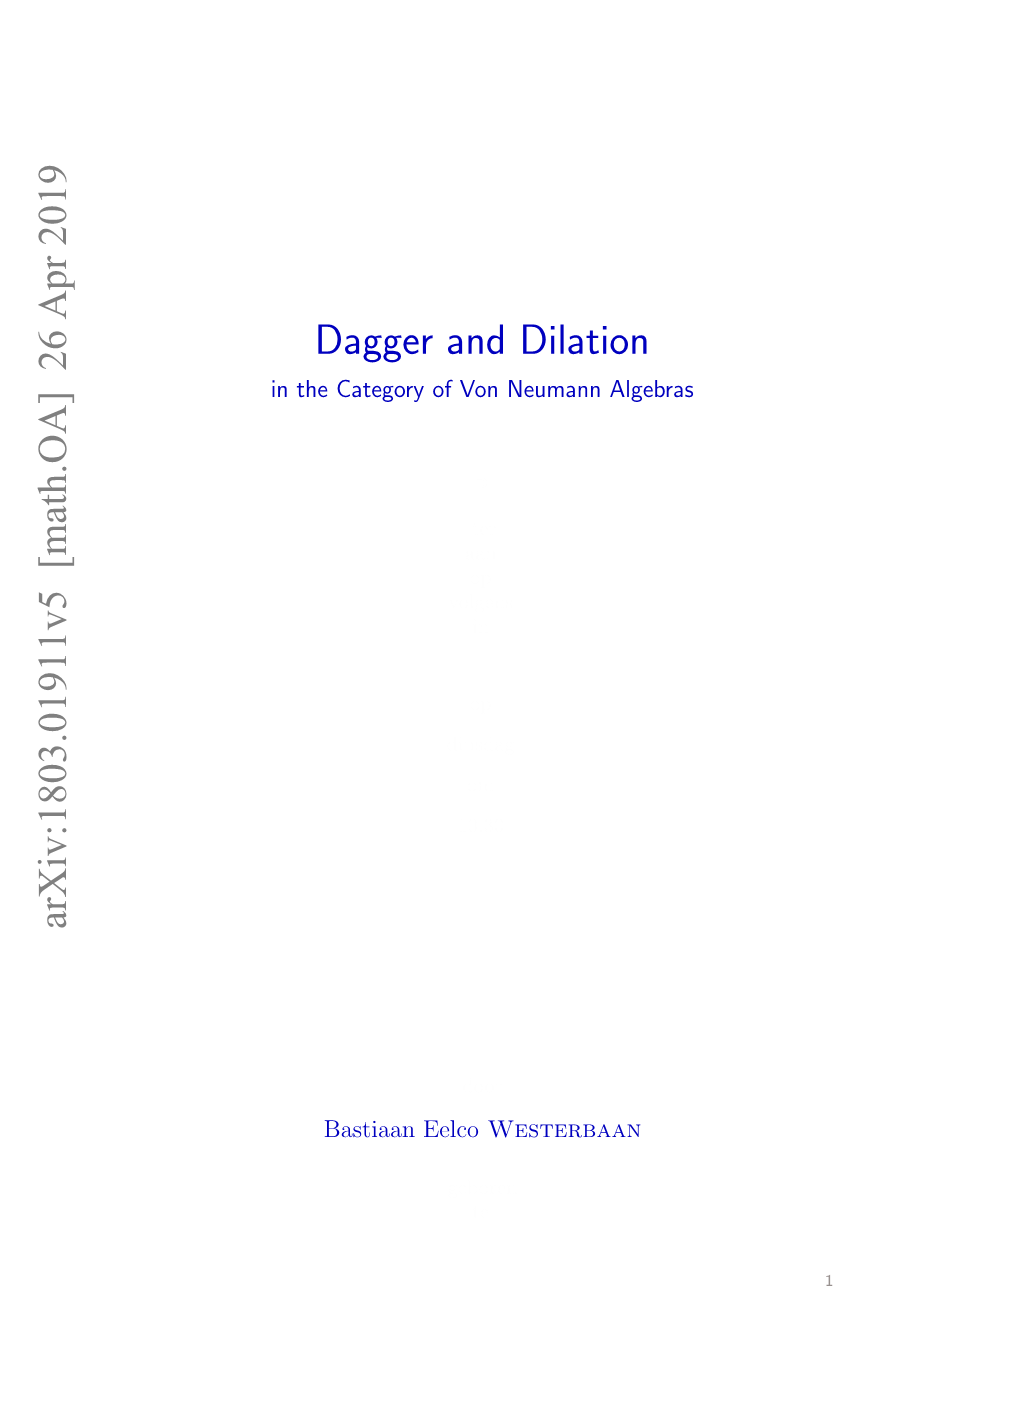 Dagger and Dilation in the Category of Von Neumann Algebras